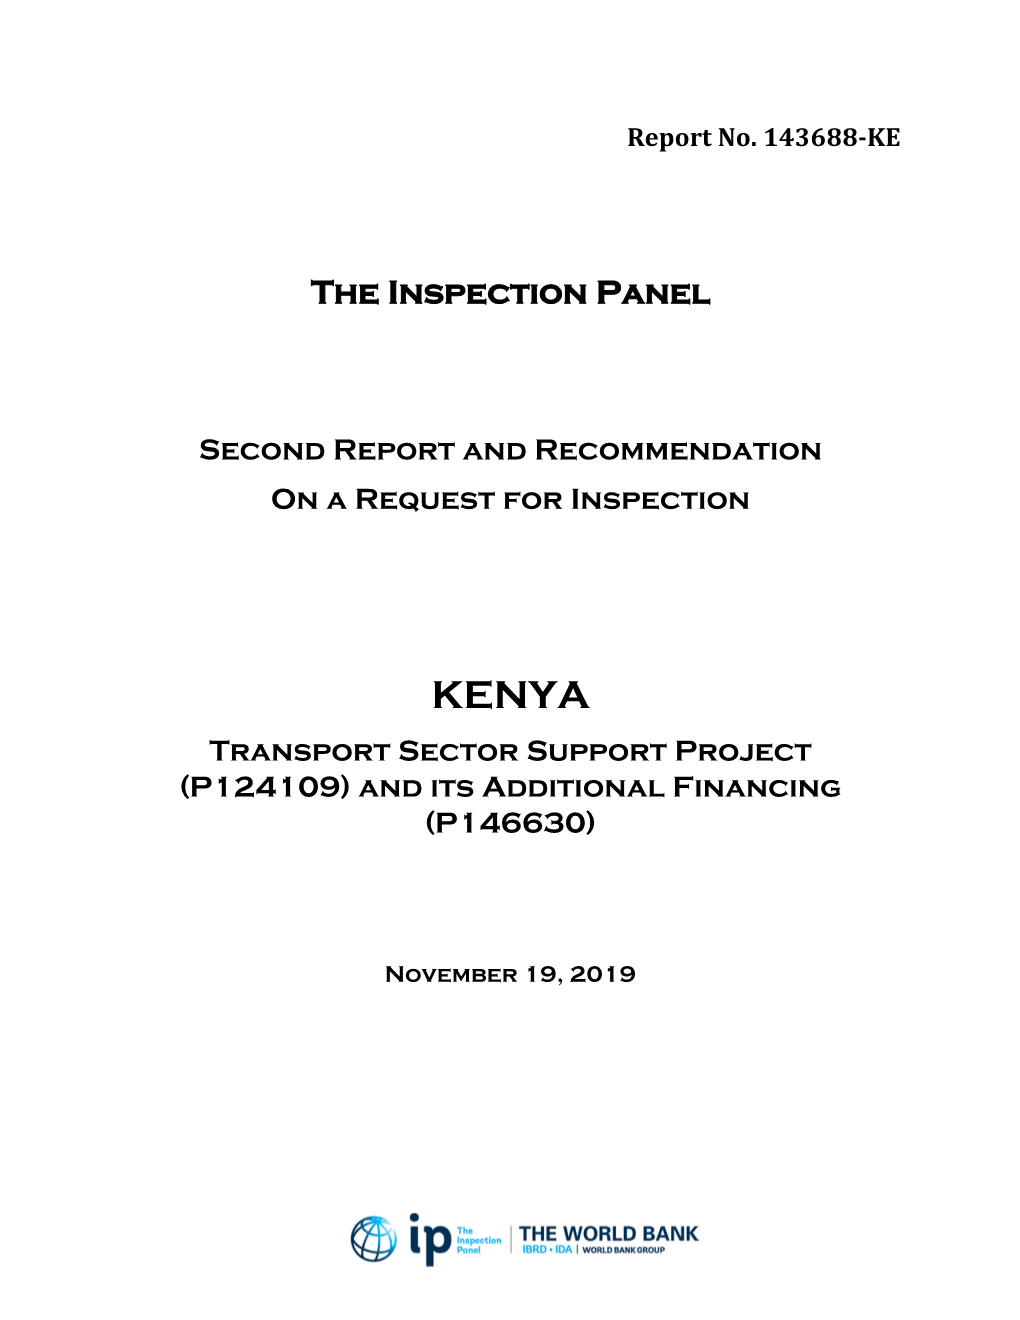 Inspection Panel Second Report and Recommendation